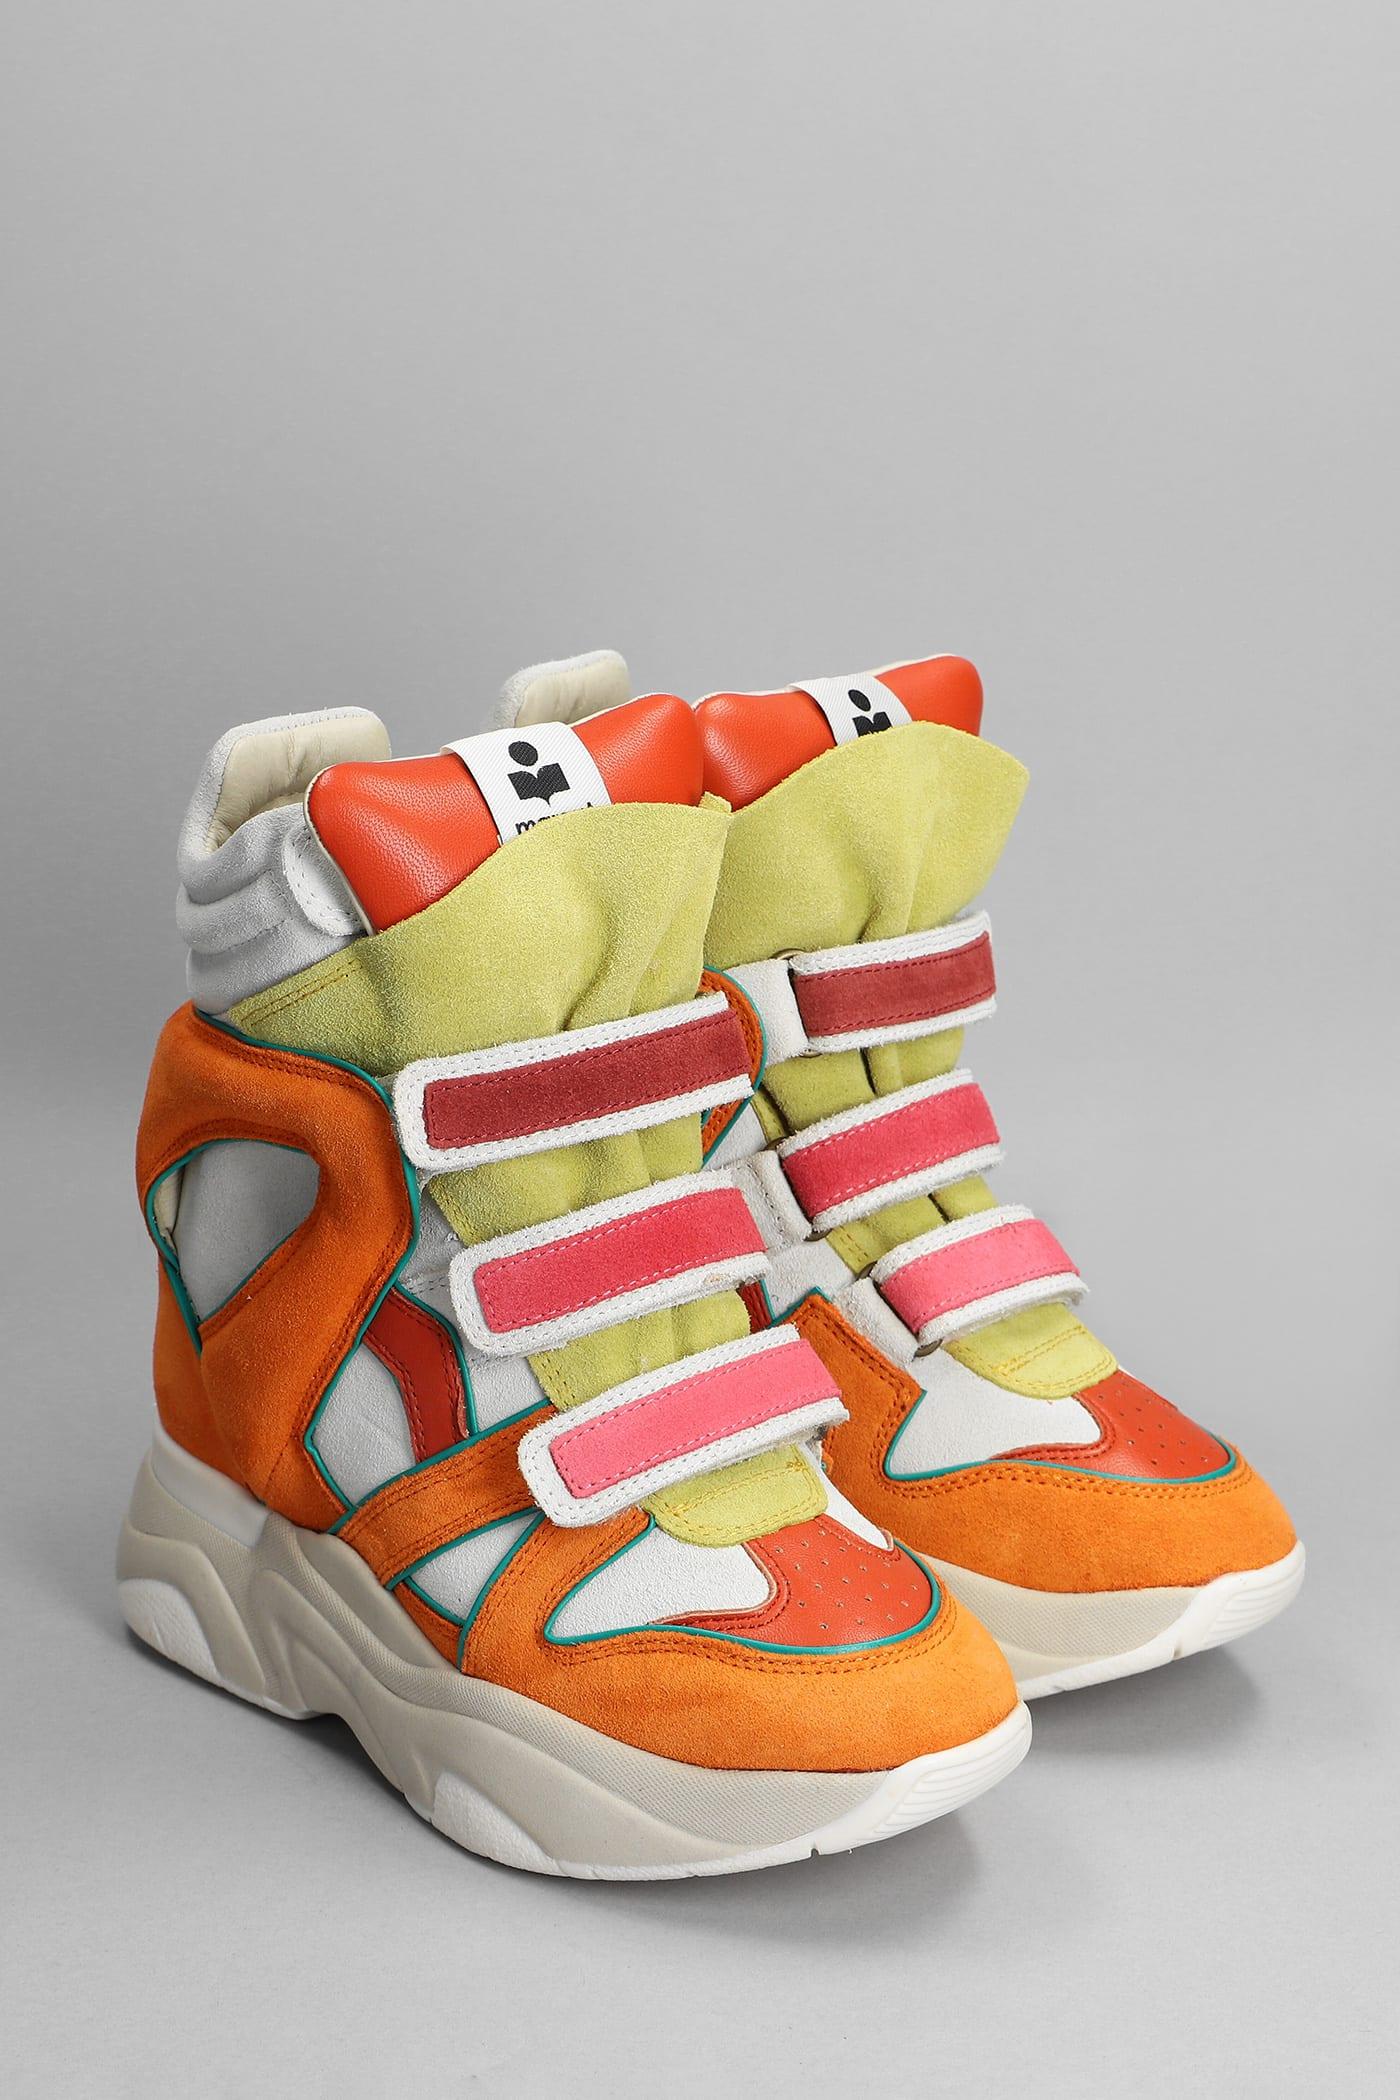 Marant Sneakers In Orange Suede And Leather |